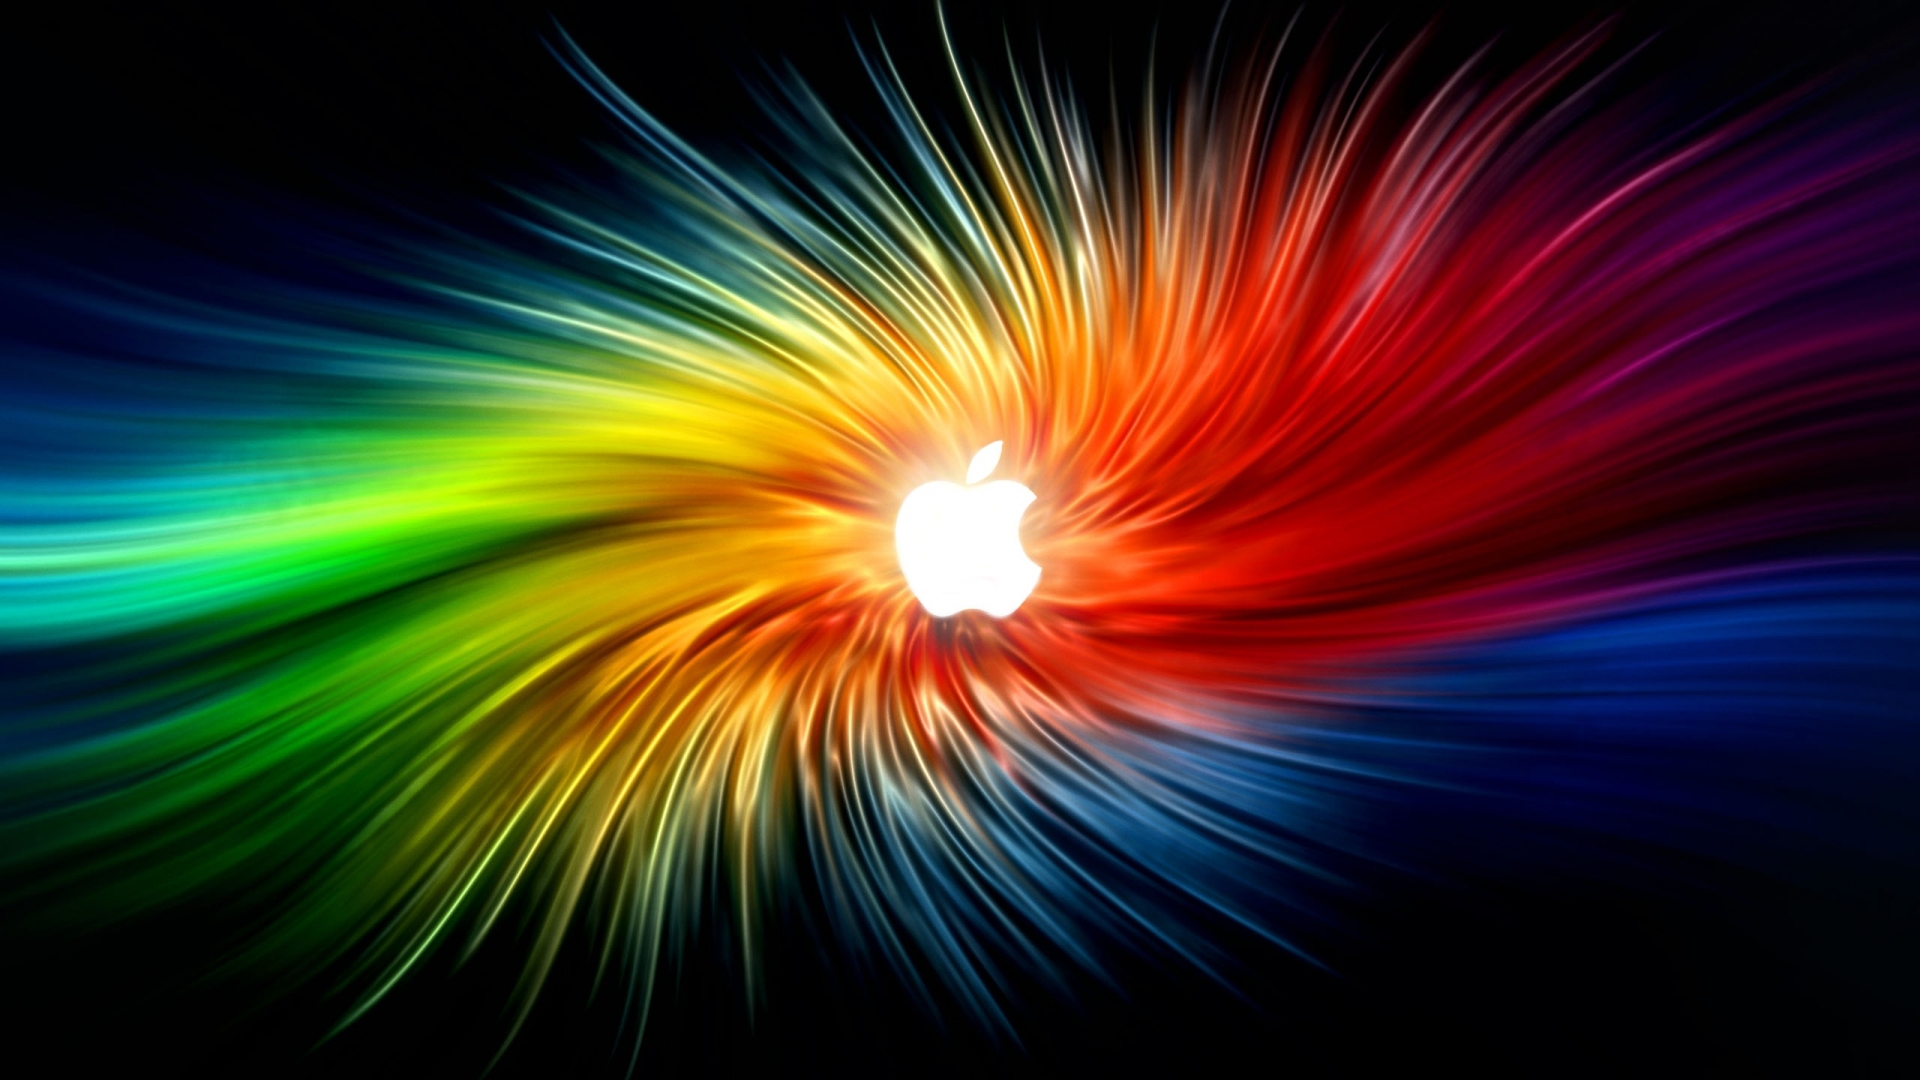 Wallpapers For Awesome Apple Backgrounds - walmage.com - walmage.com